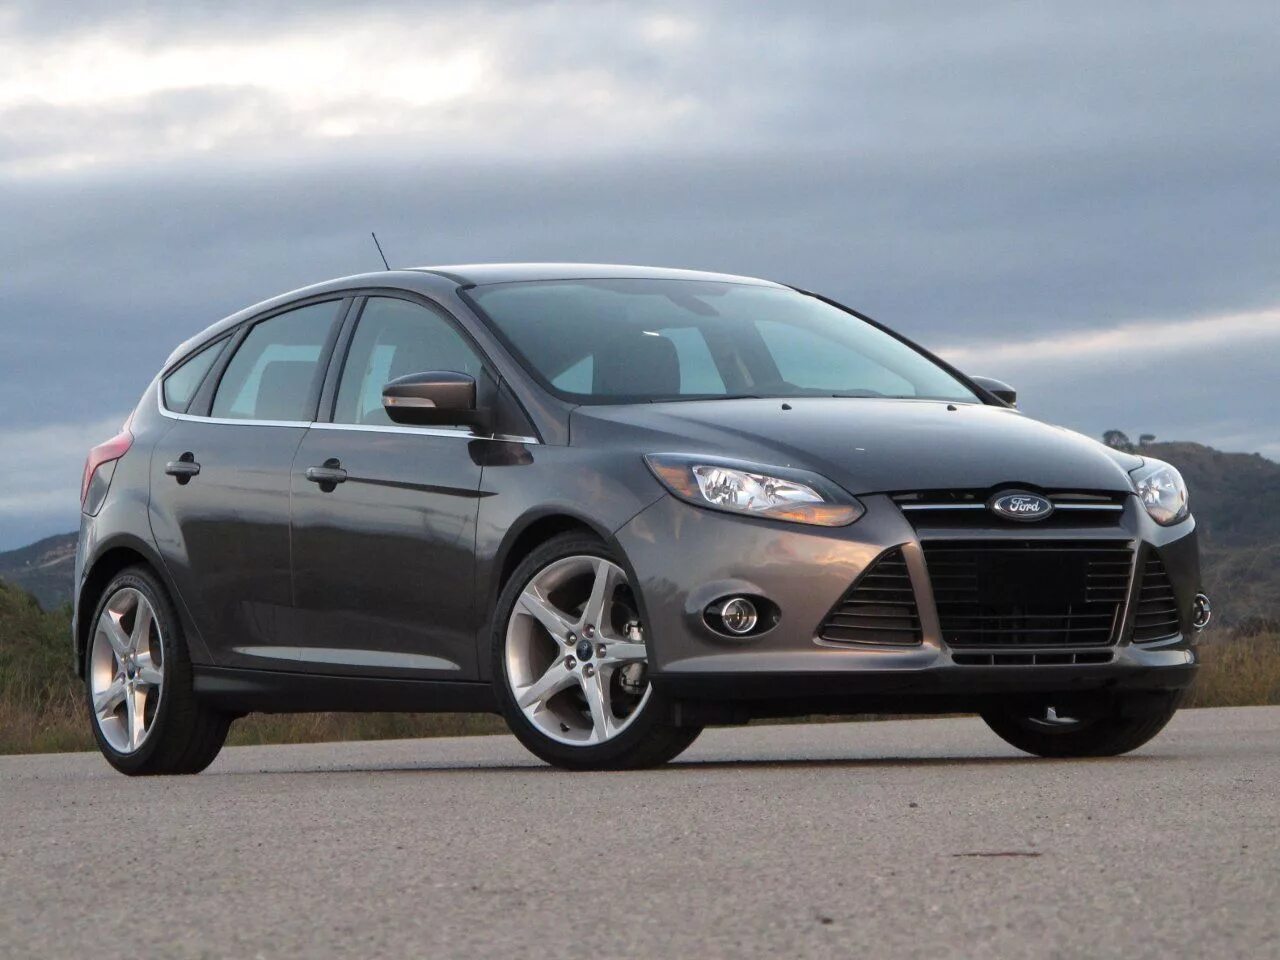 Ford Focus 3. Форд фокус 3 2012. Ford Focus 2013. Ford Focus 3 2013.